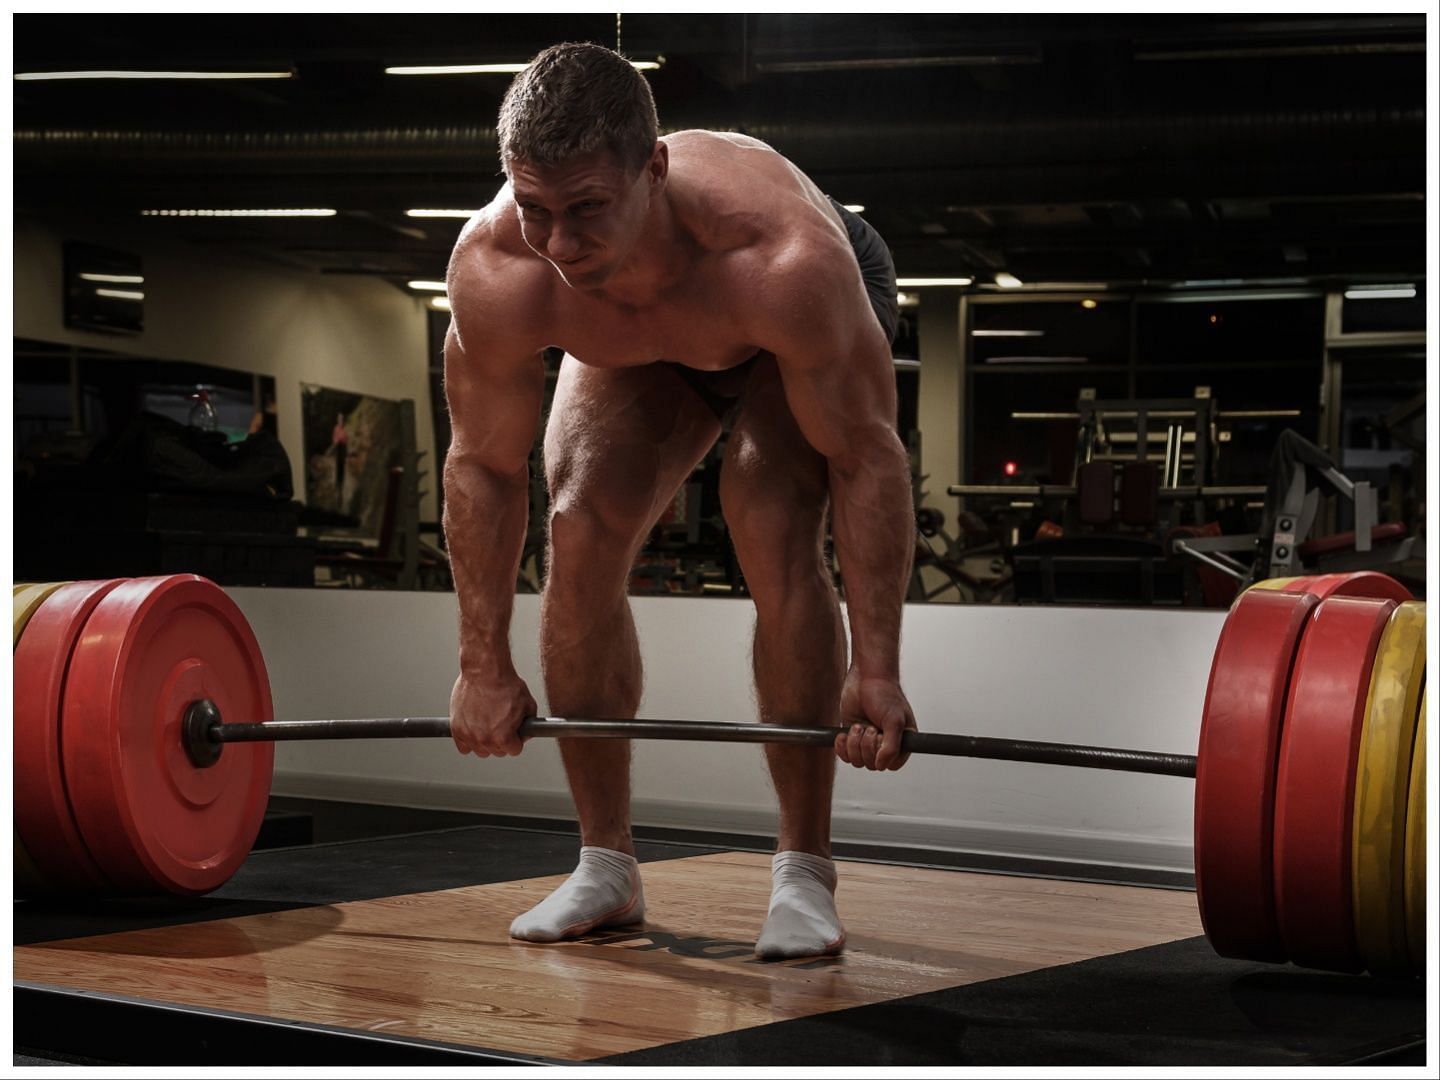 Butt Exercises - Deadlifts help strengthen the glutes muscles (Image via Vecteezy)